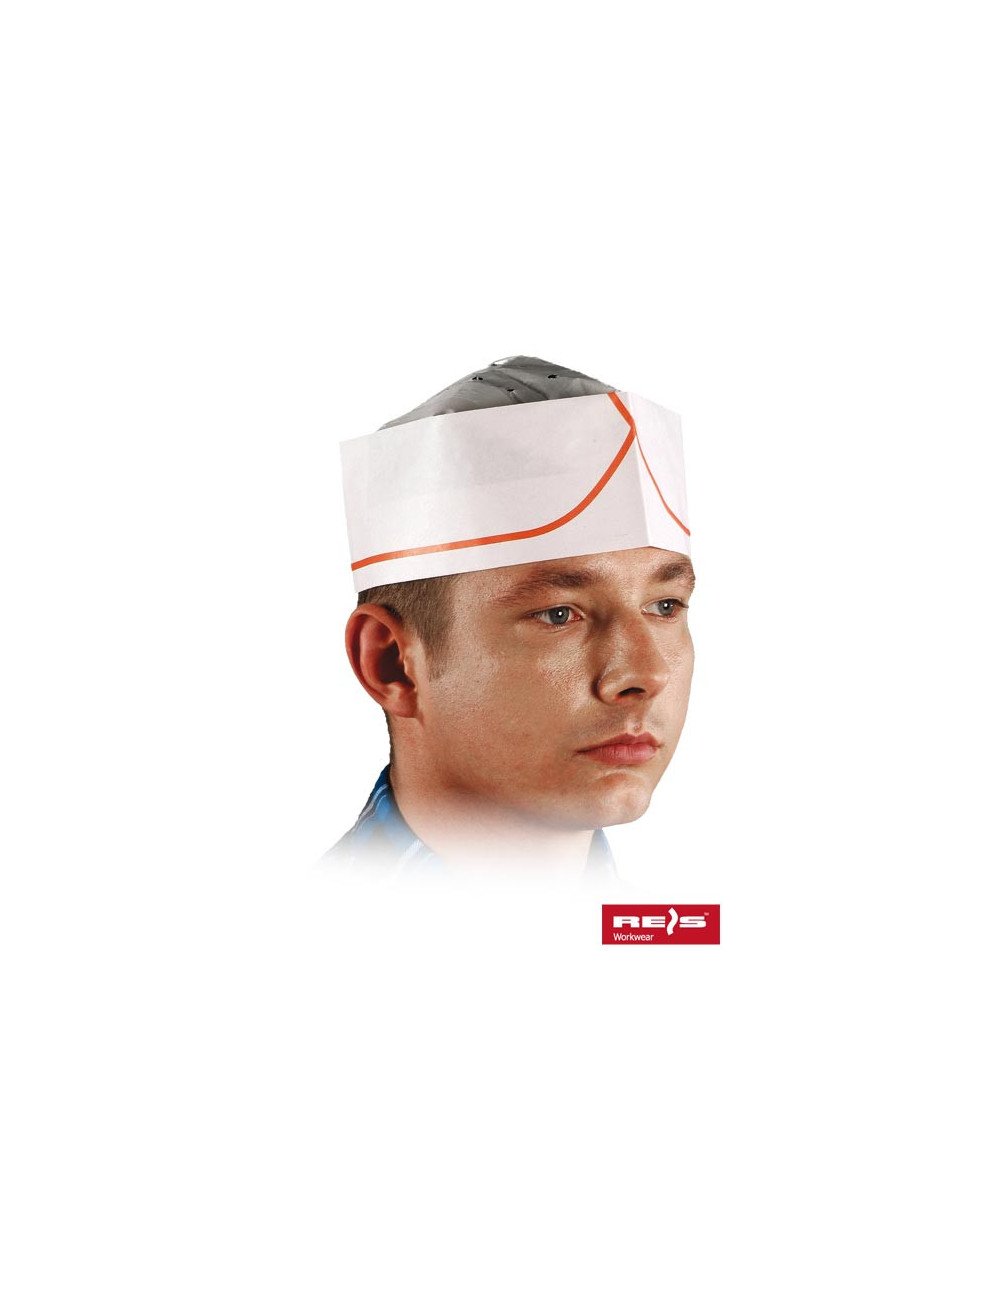 Paper cap czpap wc white-red Reis